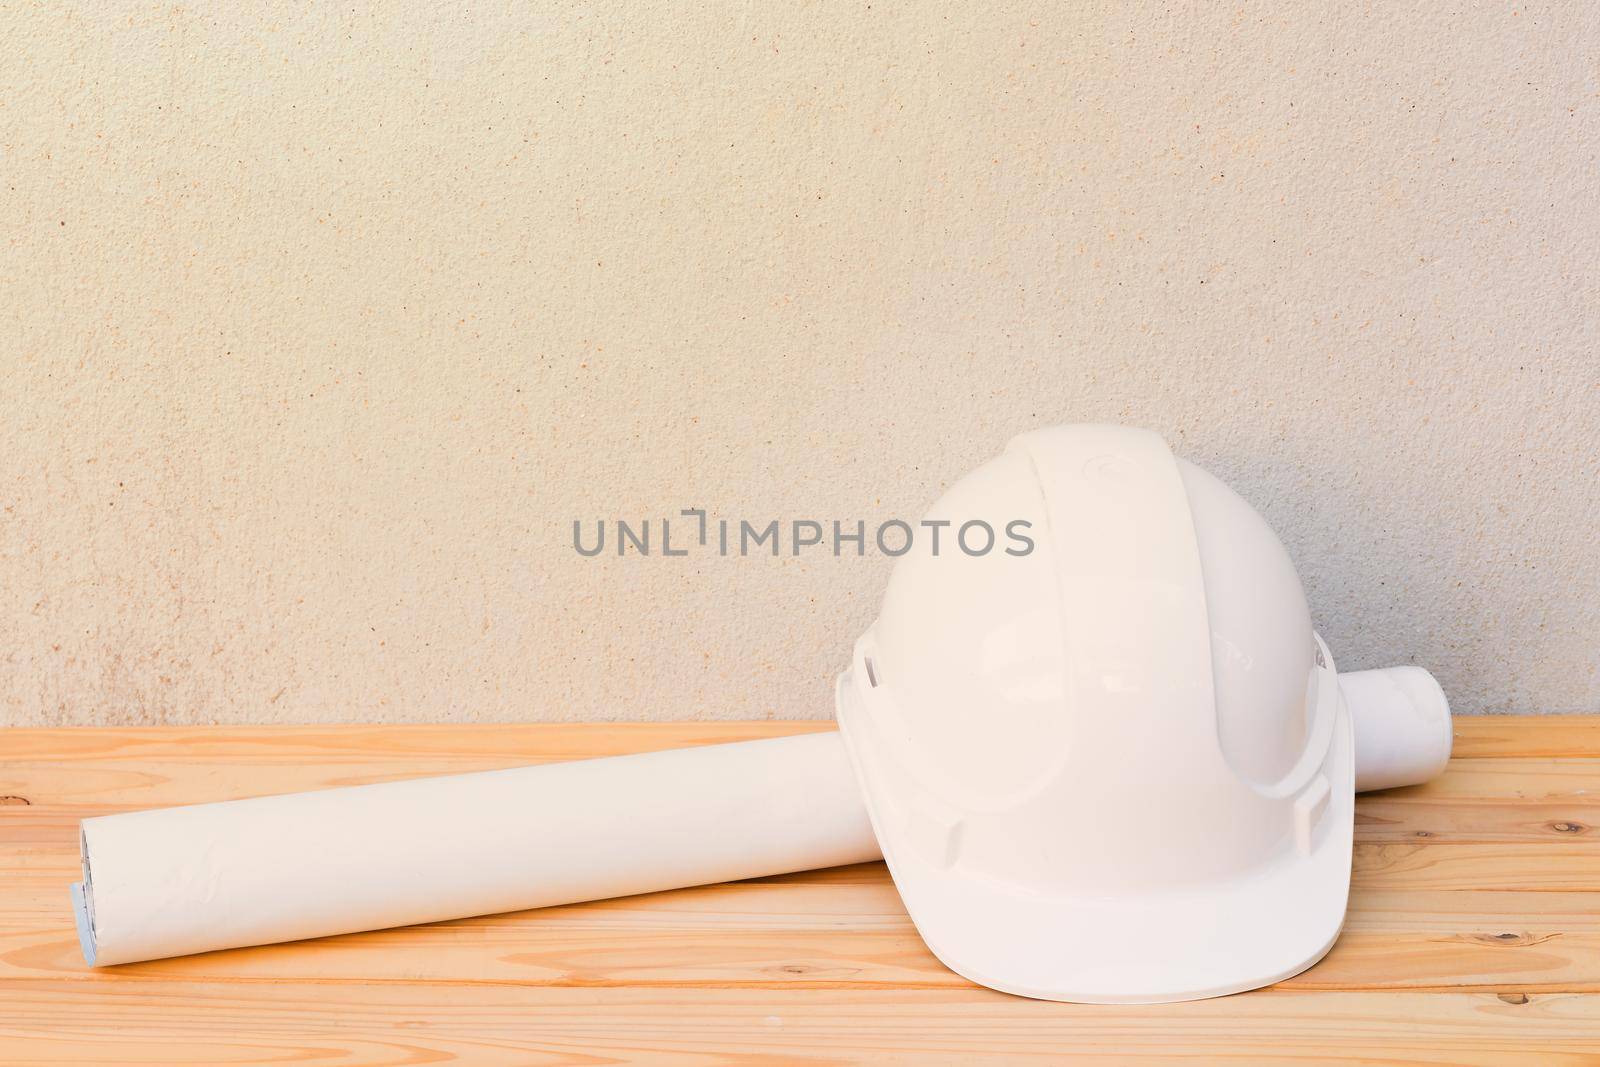 white safety helmet plastic and paper roll plan blueprint construction of engineering on wood floor table background with copy space add text by pramot